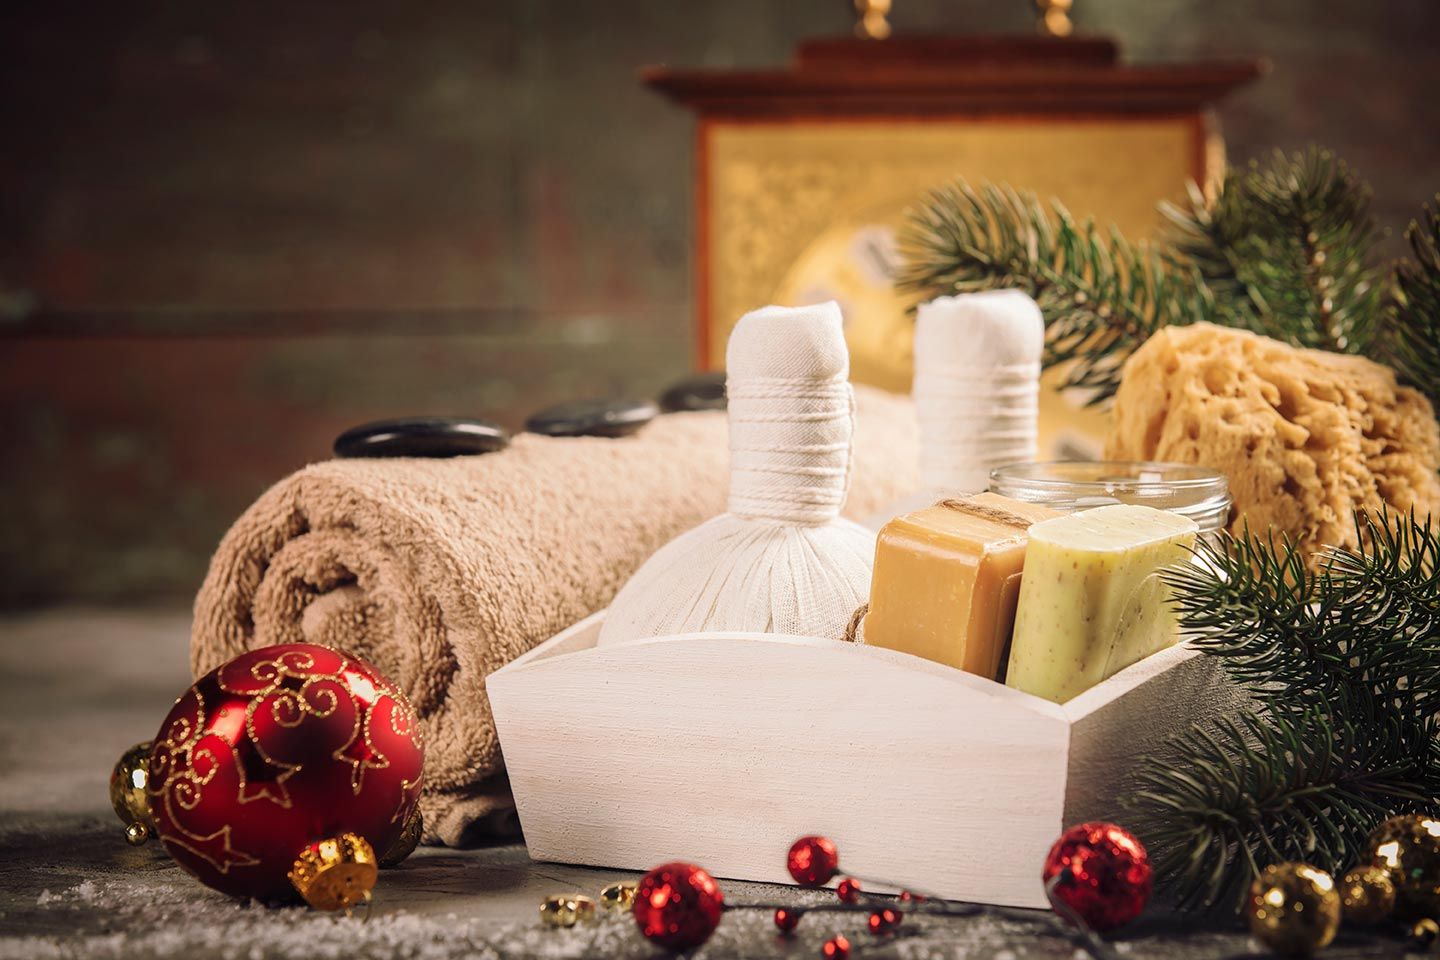 Christmas Packages 2021 at Aristocracy Salon & Day Spa in Plymouth, MA - Spa Towels & Massage Oils